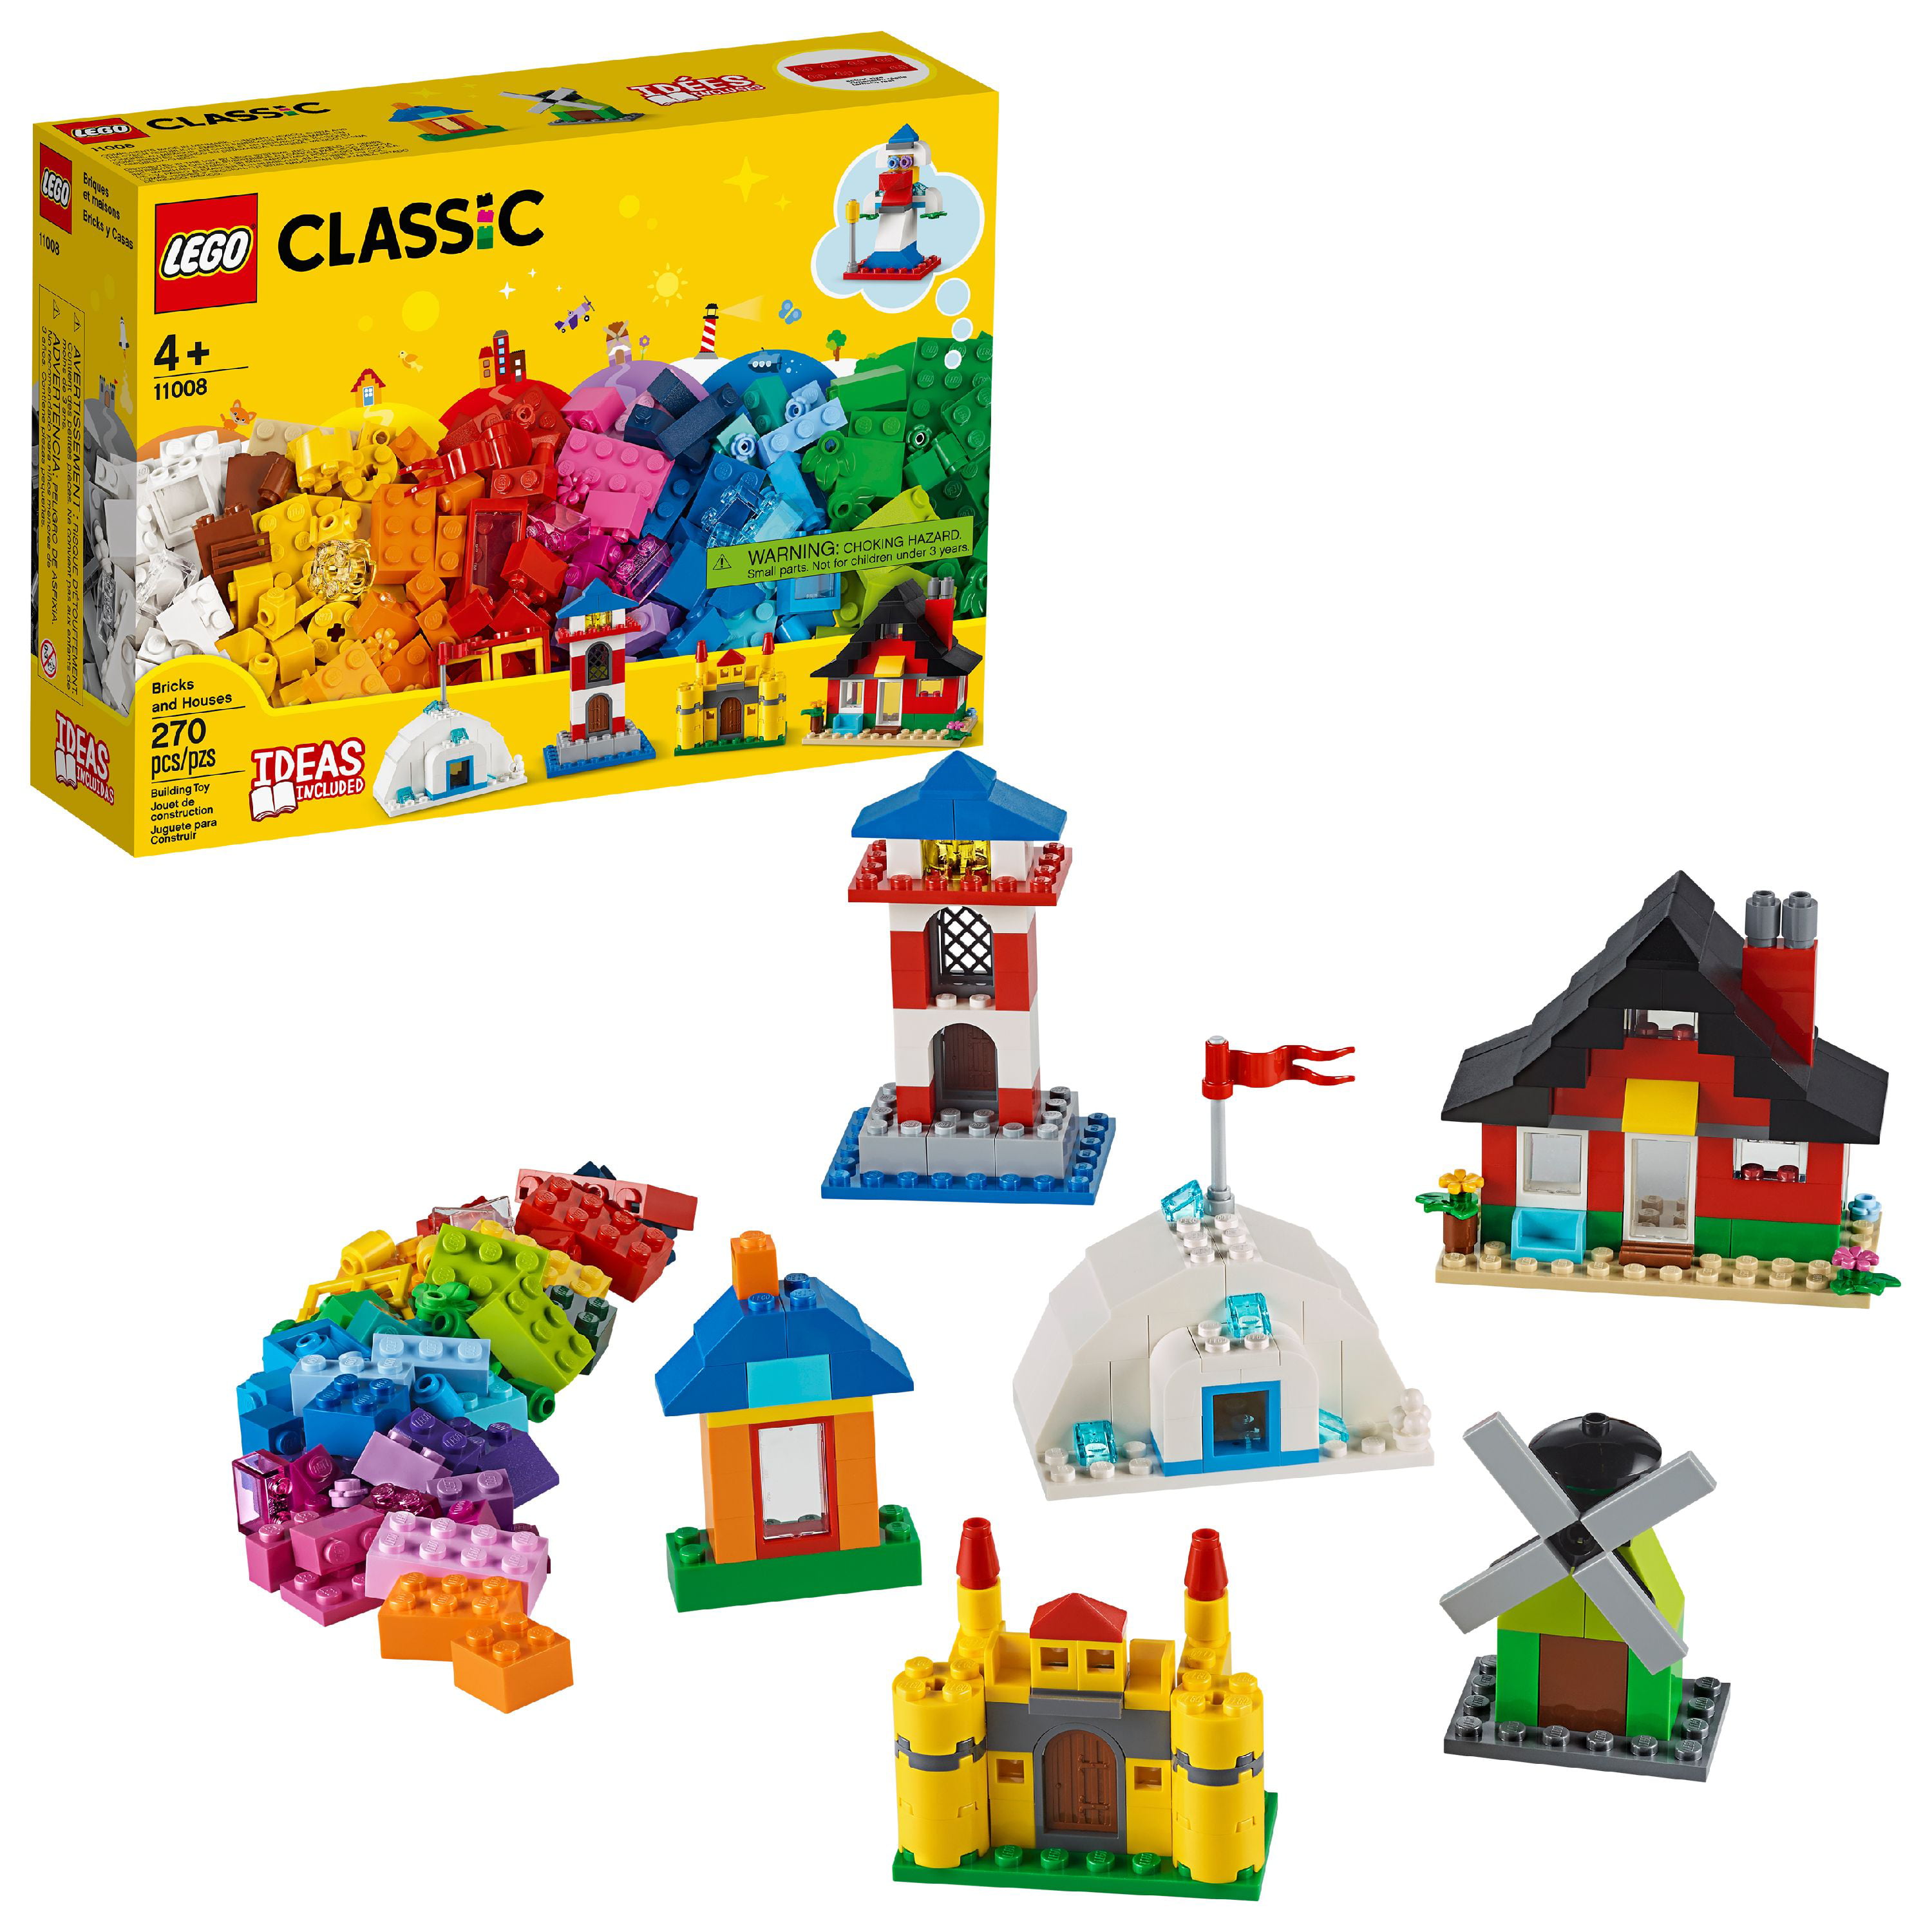 LEGO Classic Bricks and Houses 11008 Building Set for Imaginative Play ...